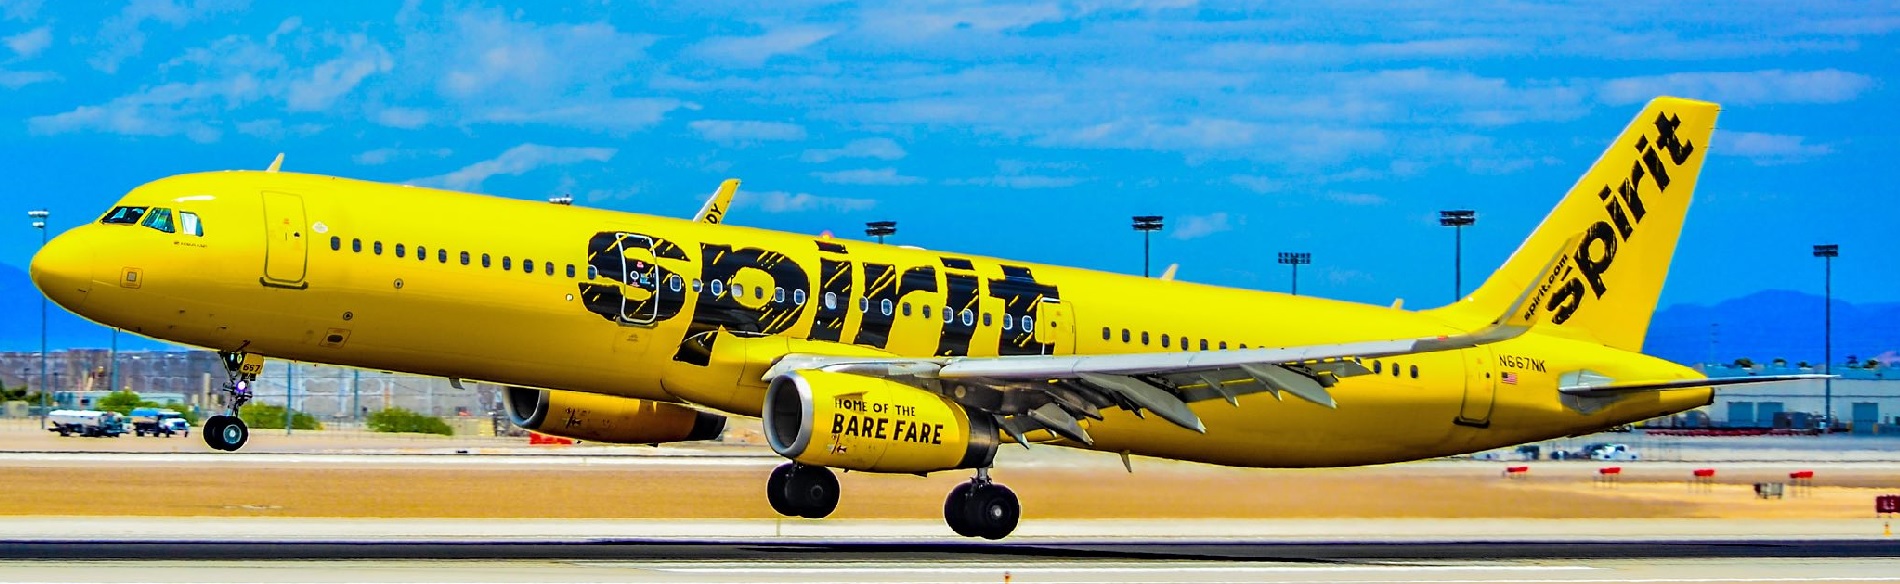 Spirit Airlines Reservations | Book Flight Tickets, Official Site